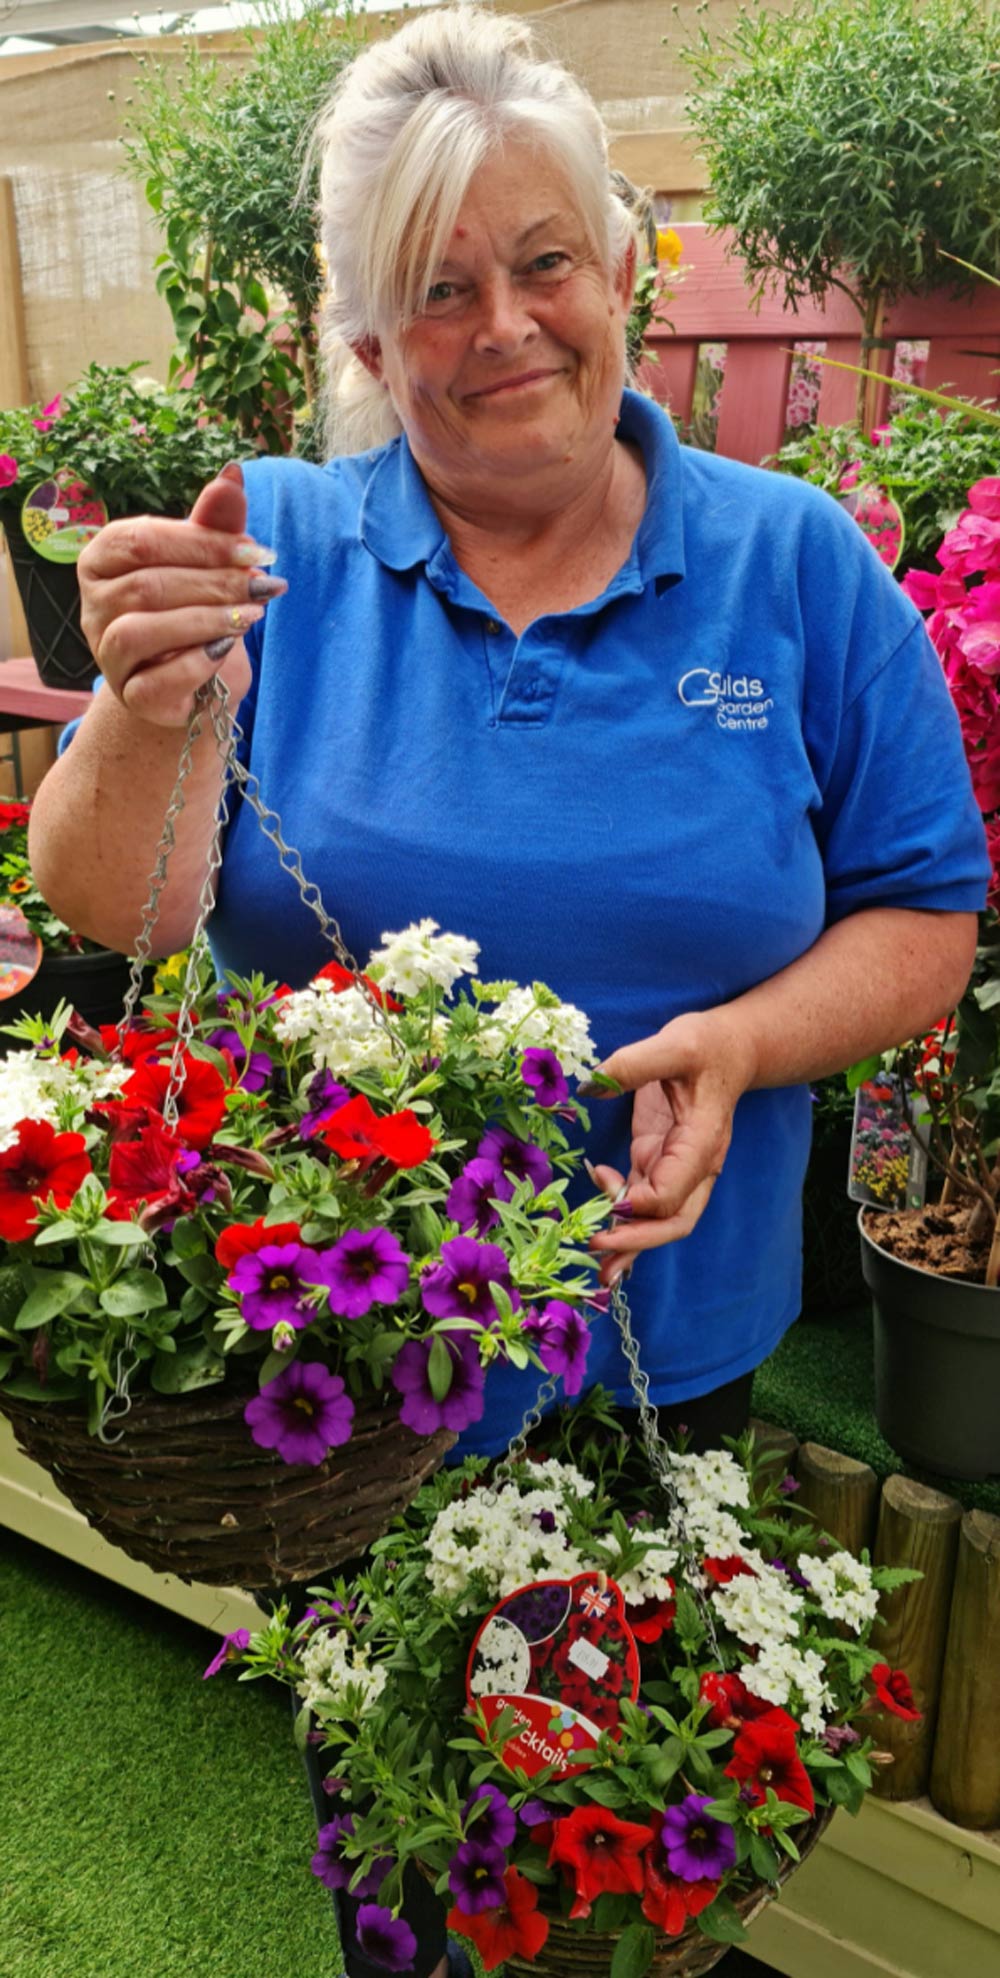 Hanging baskets need watering at least once a day, says Sue Butterworth of Goulds Garden Centre